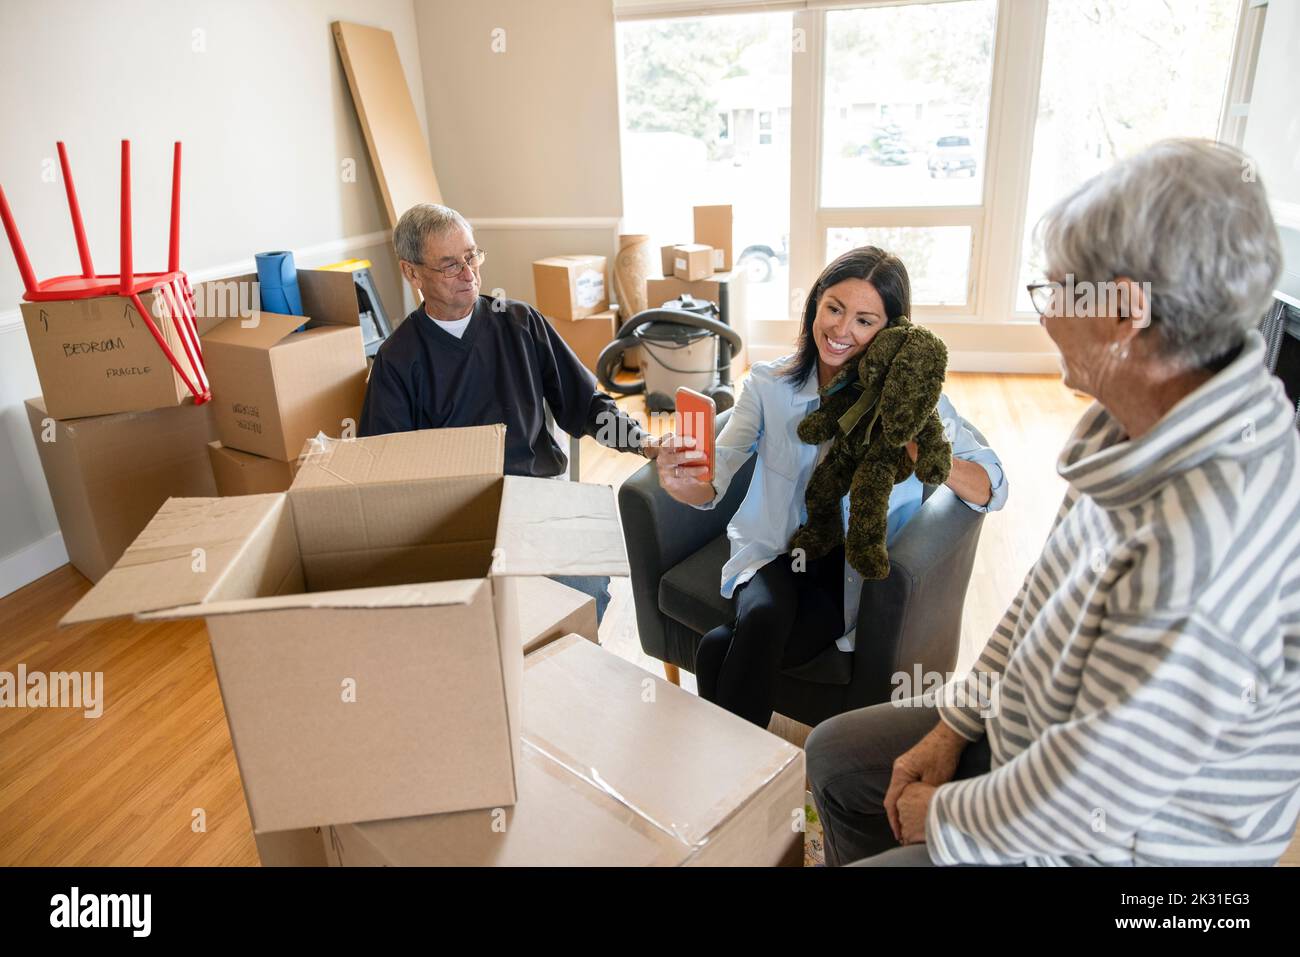 Senior parents watching daughter unpack old stuffed animal in new home Stock Photo